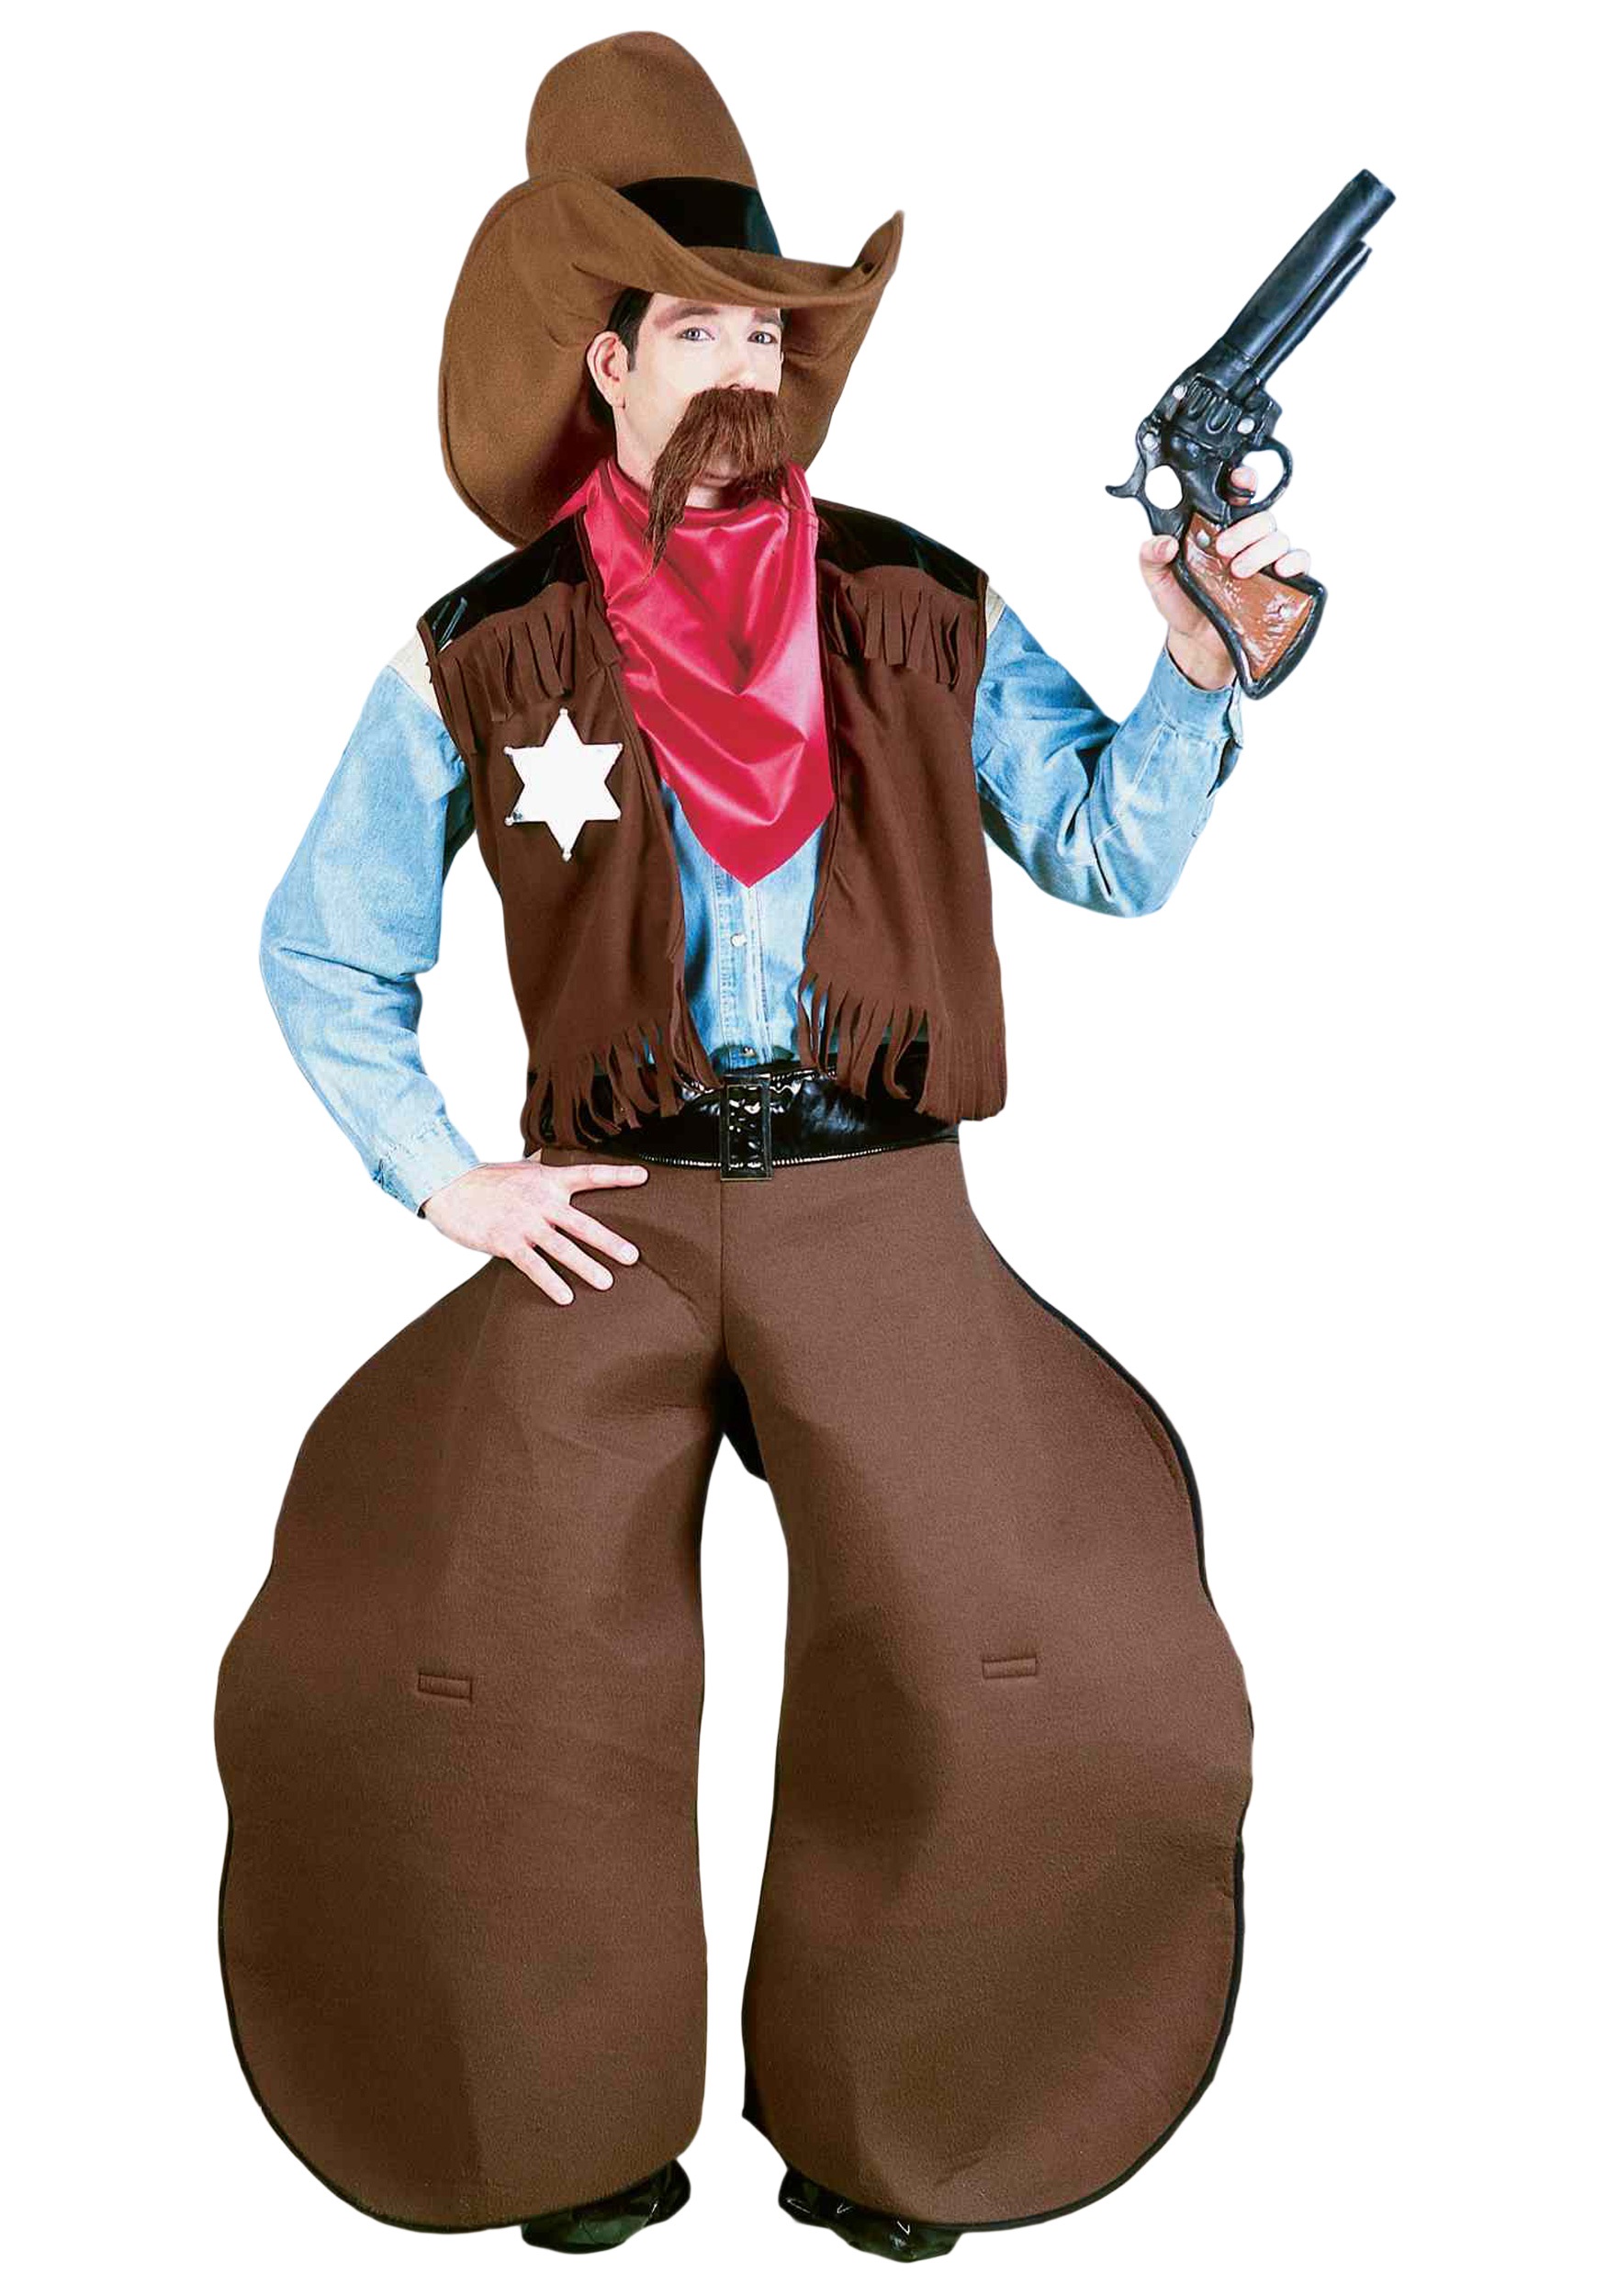 https://images.halloweencostumes.ca/products/3738/1-1/adult-ole-cowhand-cowboy-costume.jpg